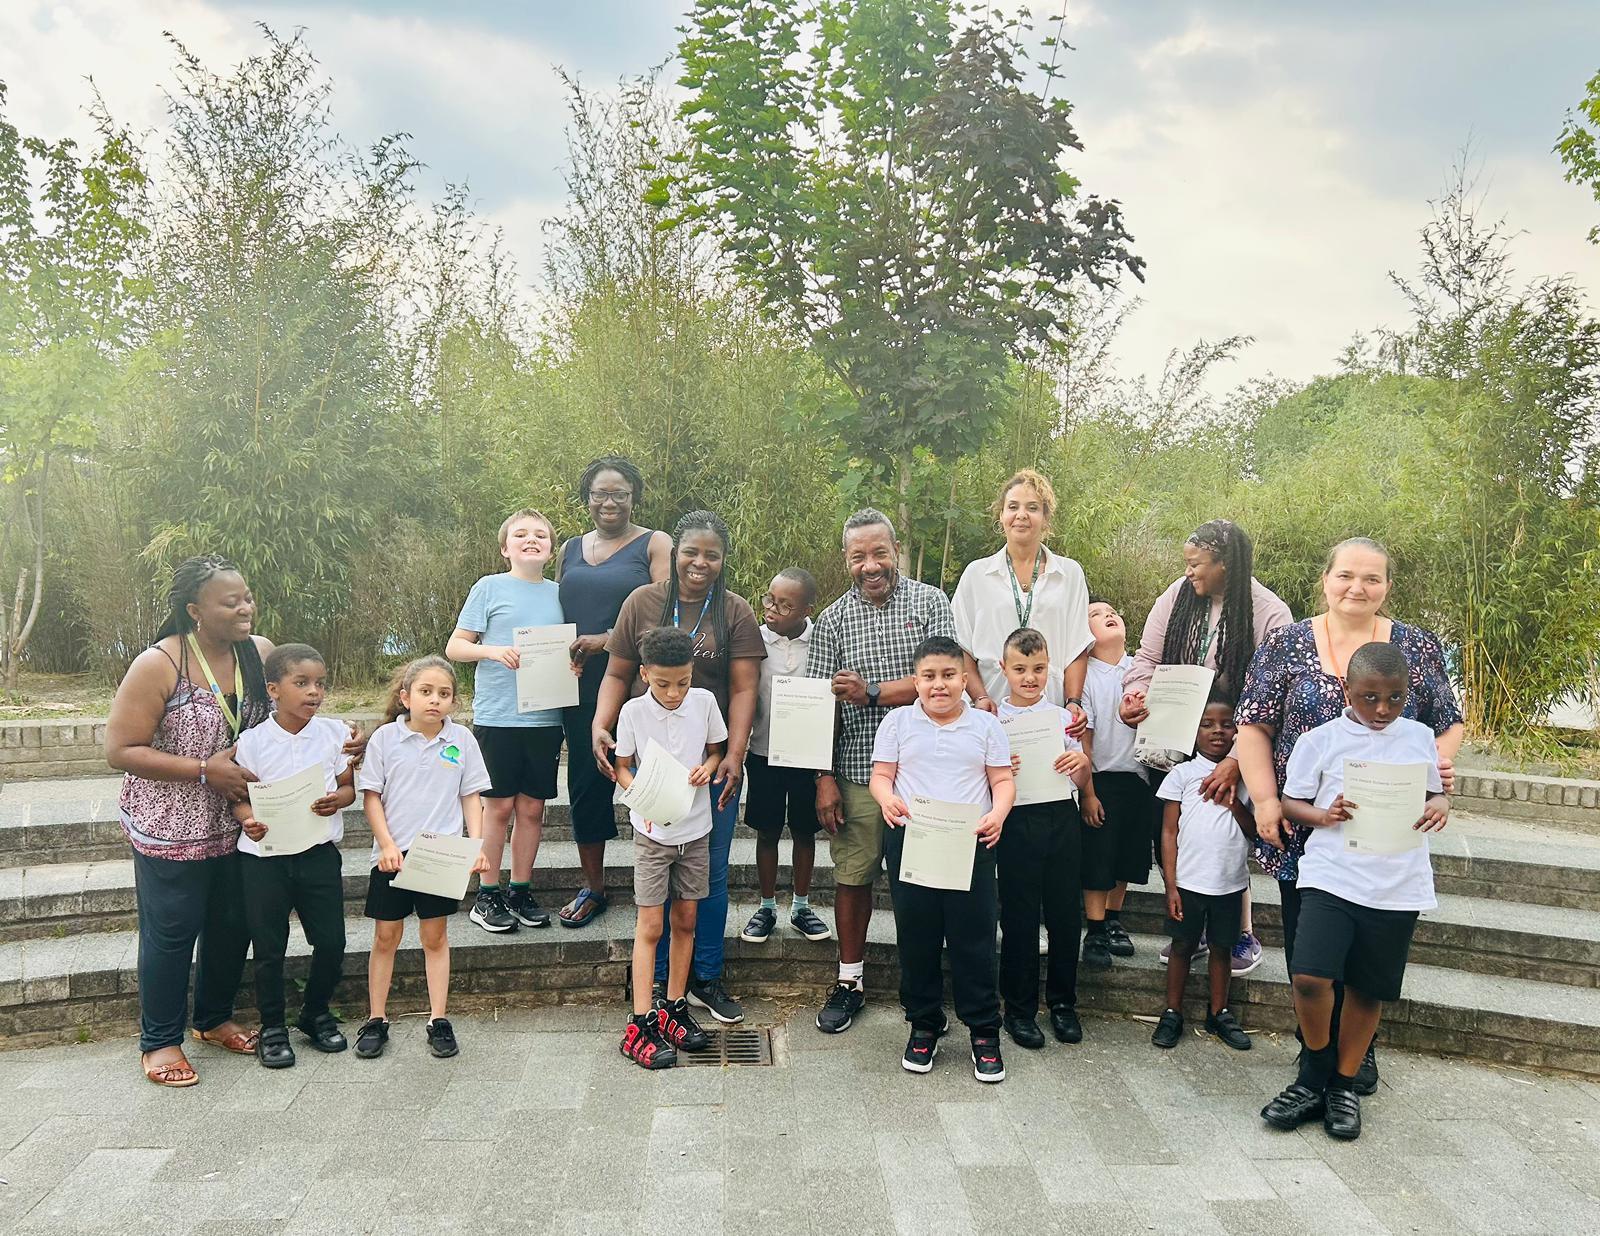 The picture is of children and staff at The Brook Special School in Broadwater Farm, with the children proudly holding up their AQA accreditation certificates.